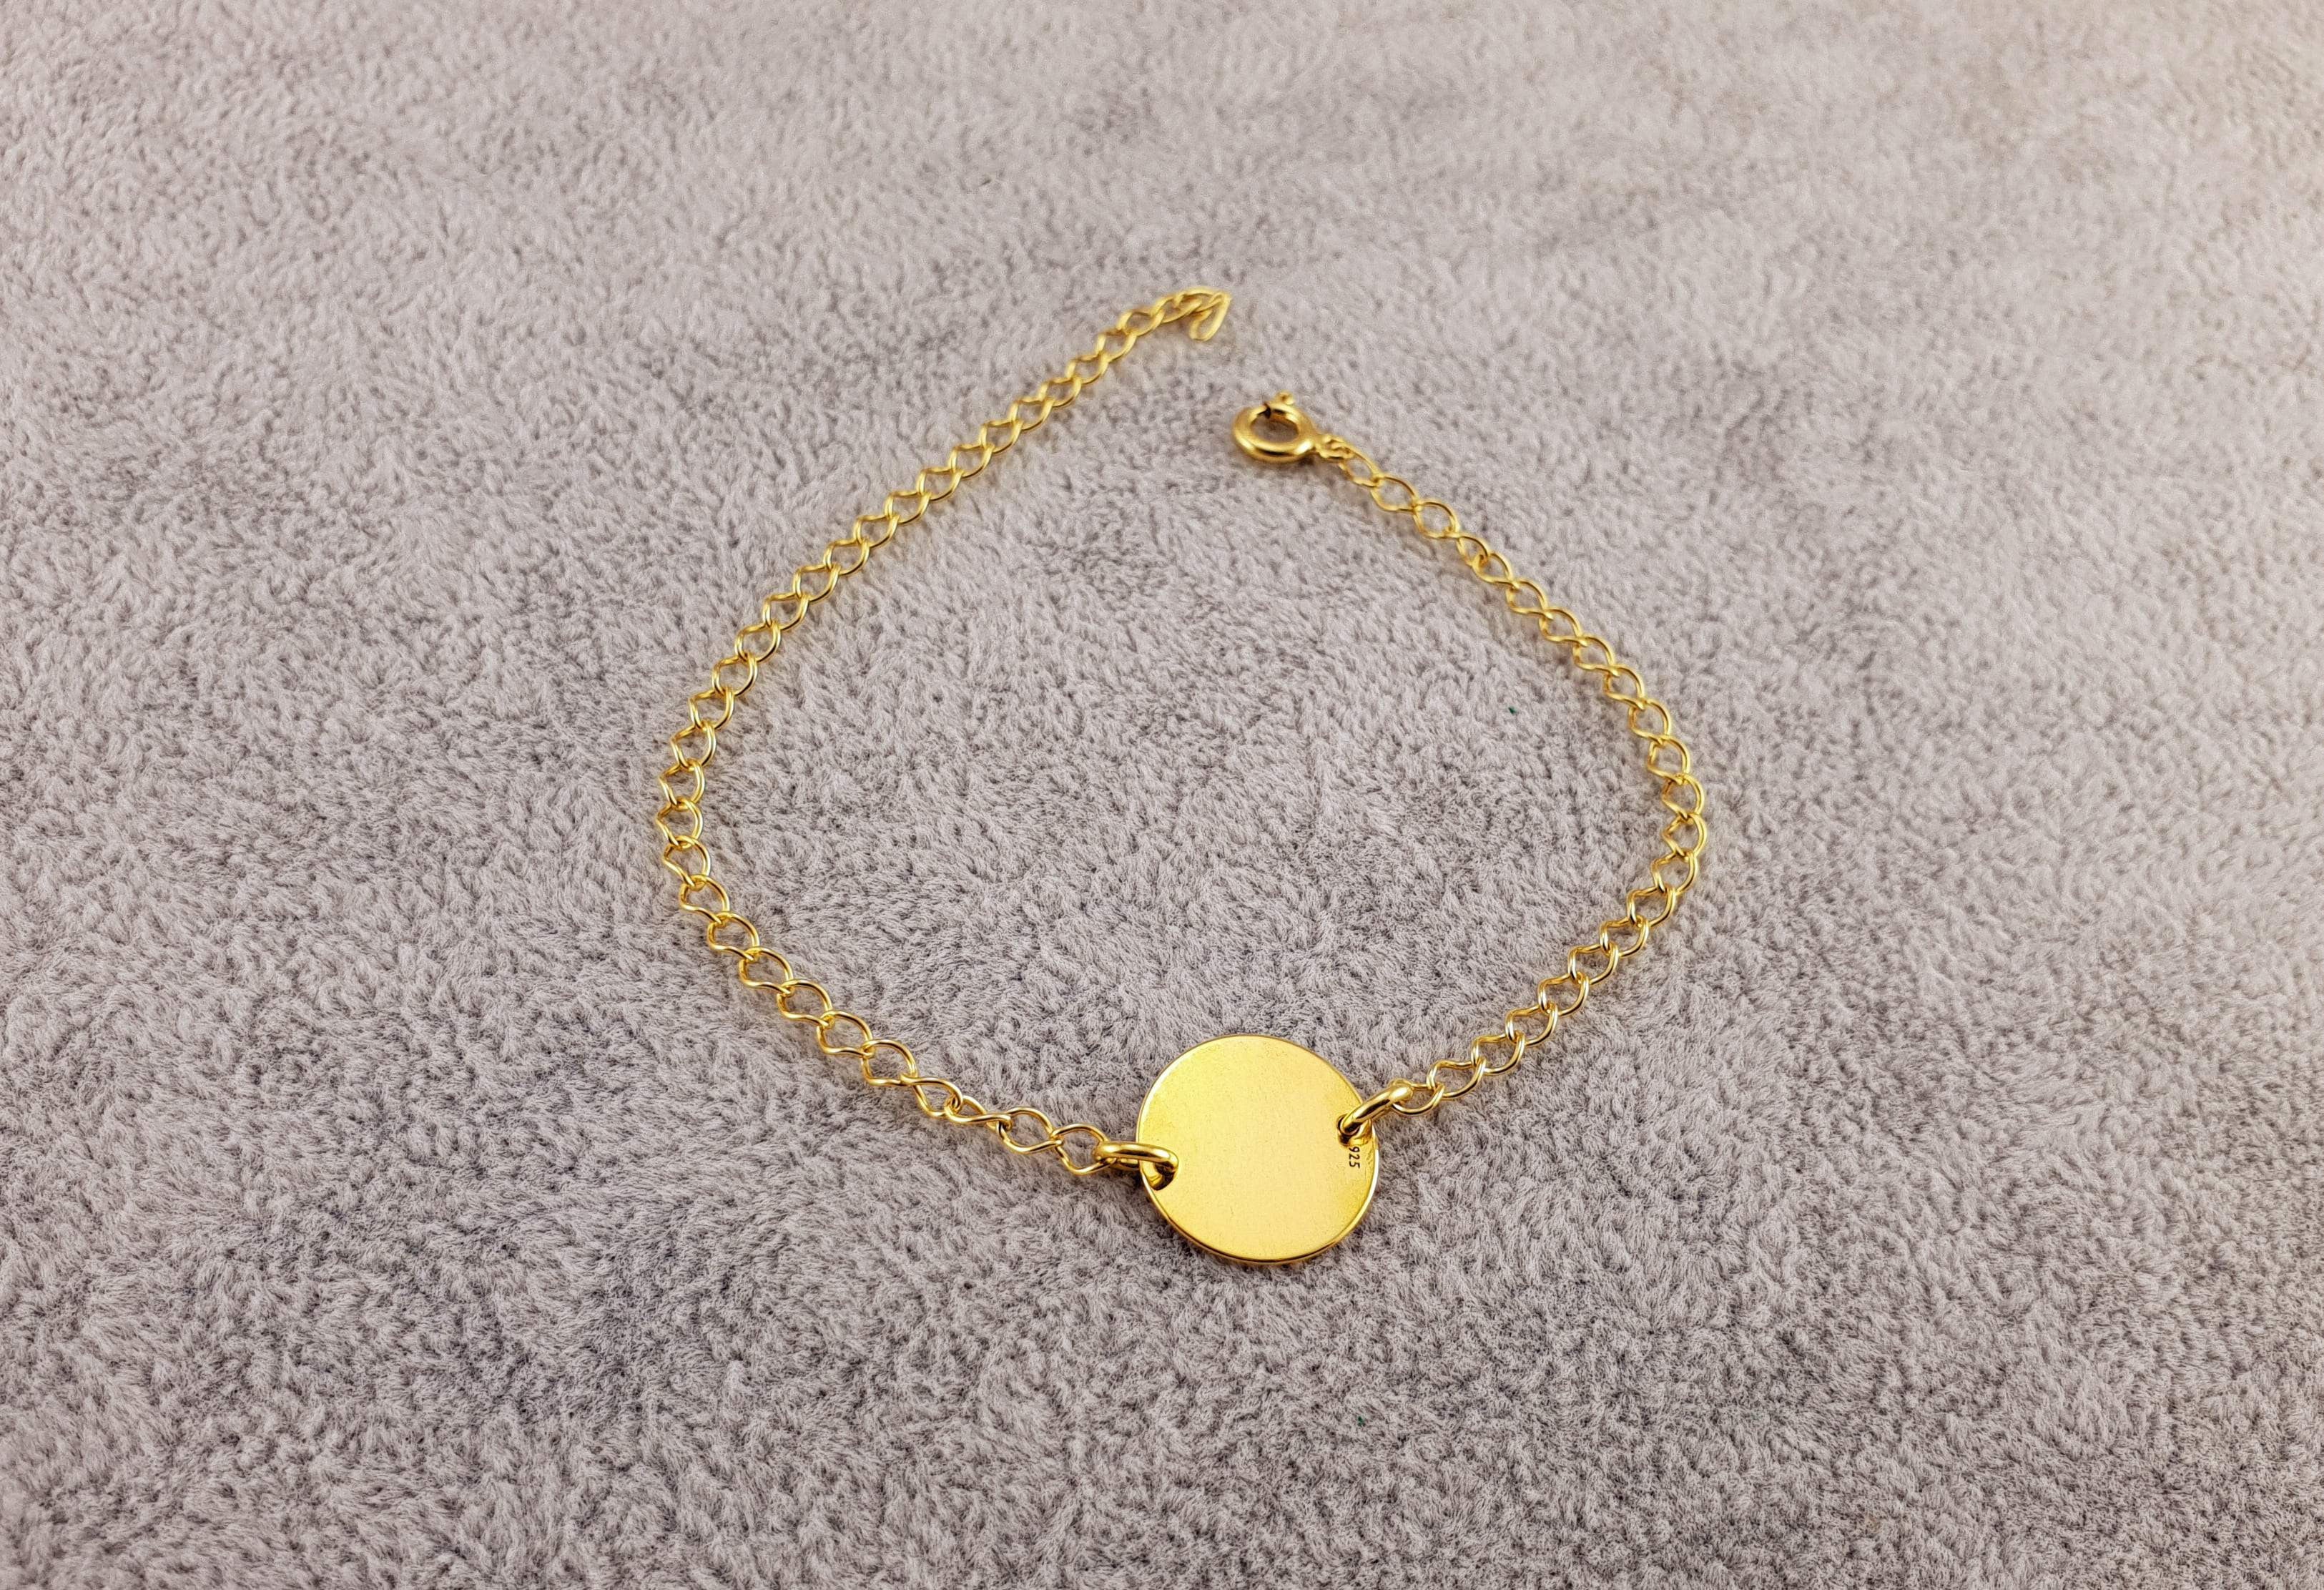 GOLD PLATED 24K BRACELET - GOLDEN COIN - By Janine Jewellery